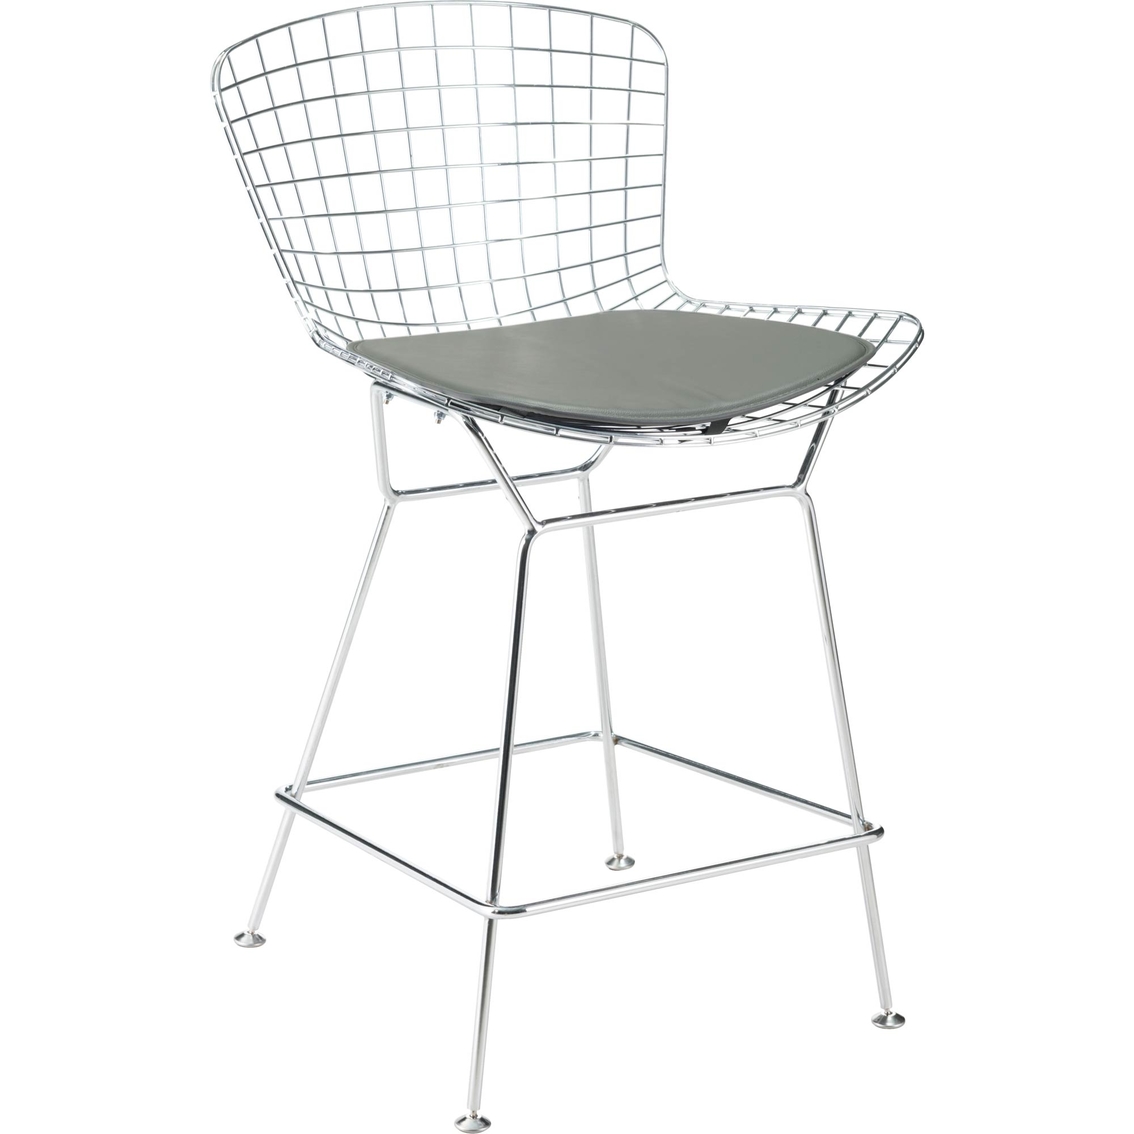 Zuo Modern Wire Mesh Chair Cushion - Image 3 of 4